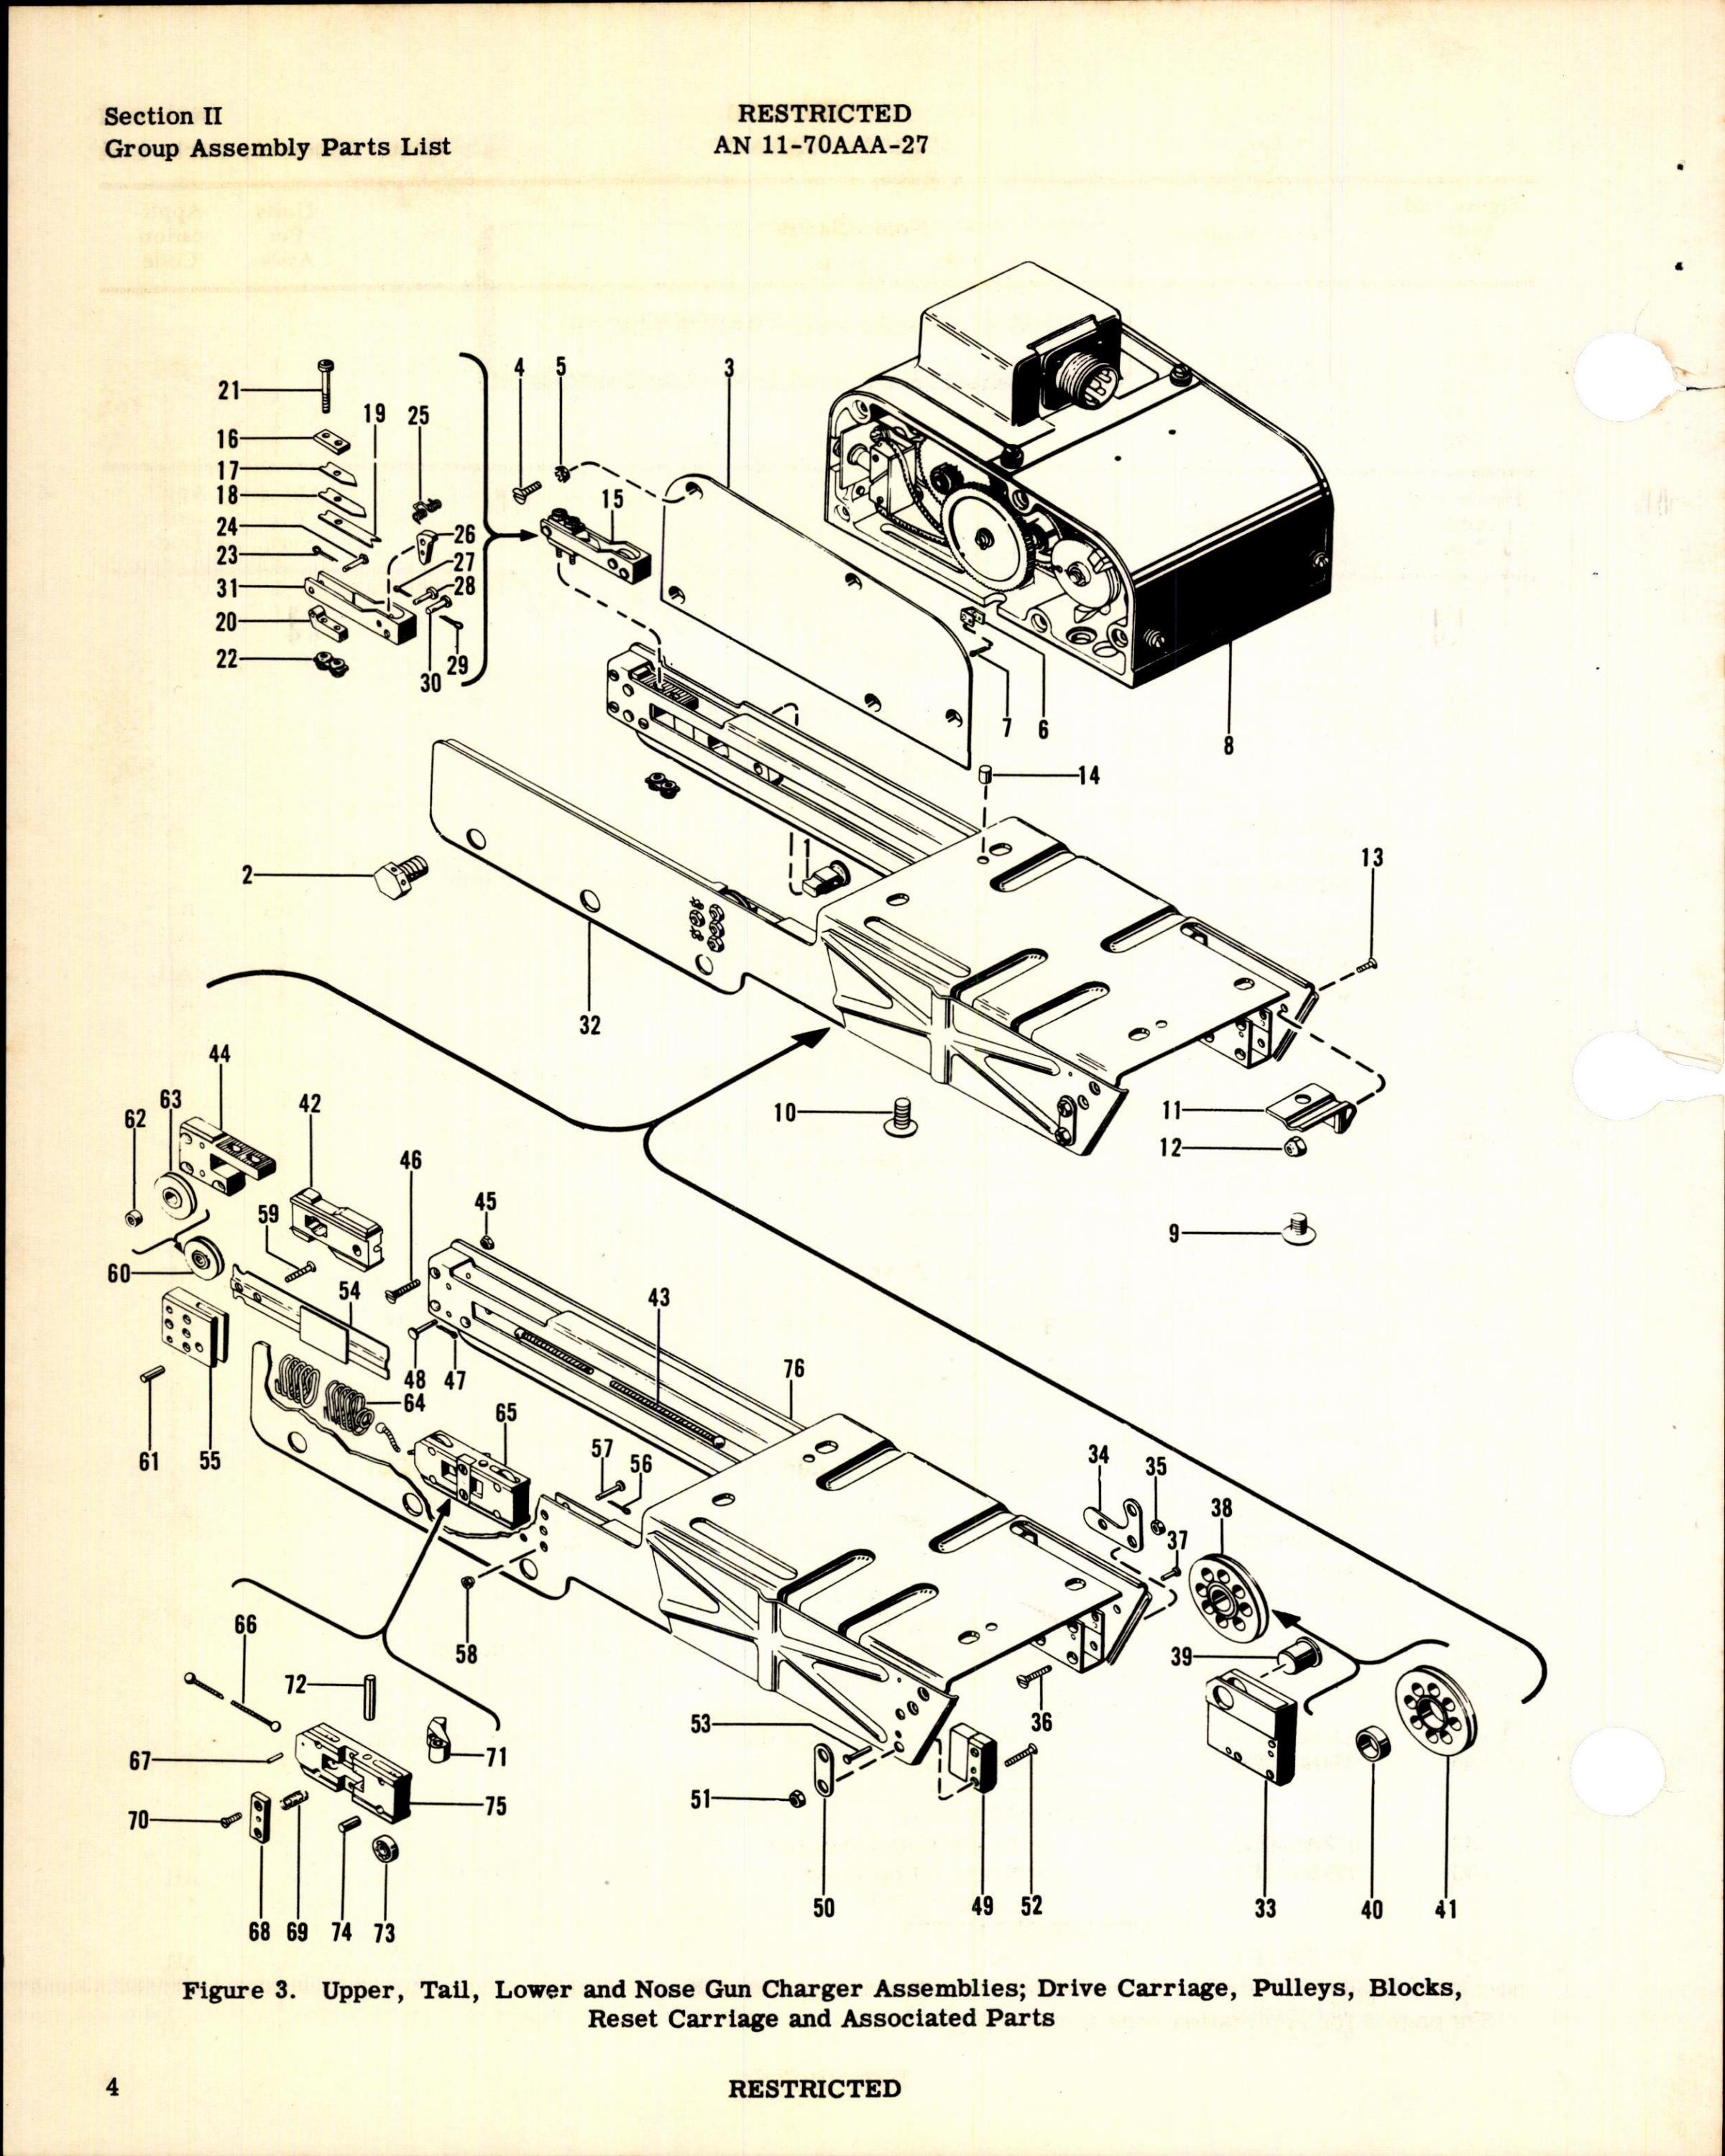 Sample page 4 from AirCorps Library document: 20-MM Electric Gun Charger Part No 9628331G2 & 9628332G2